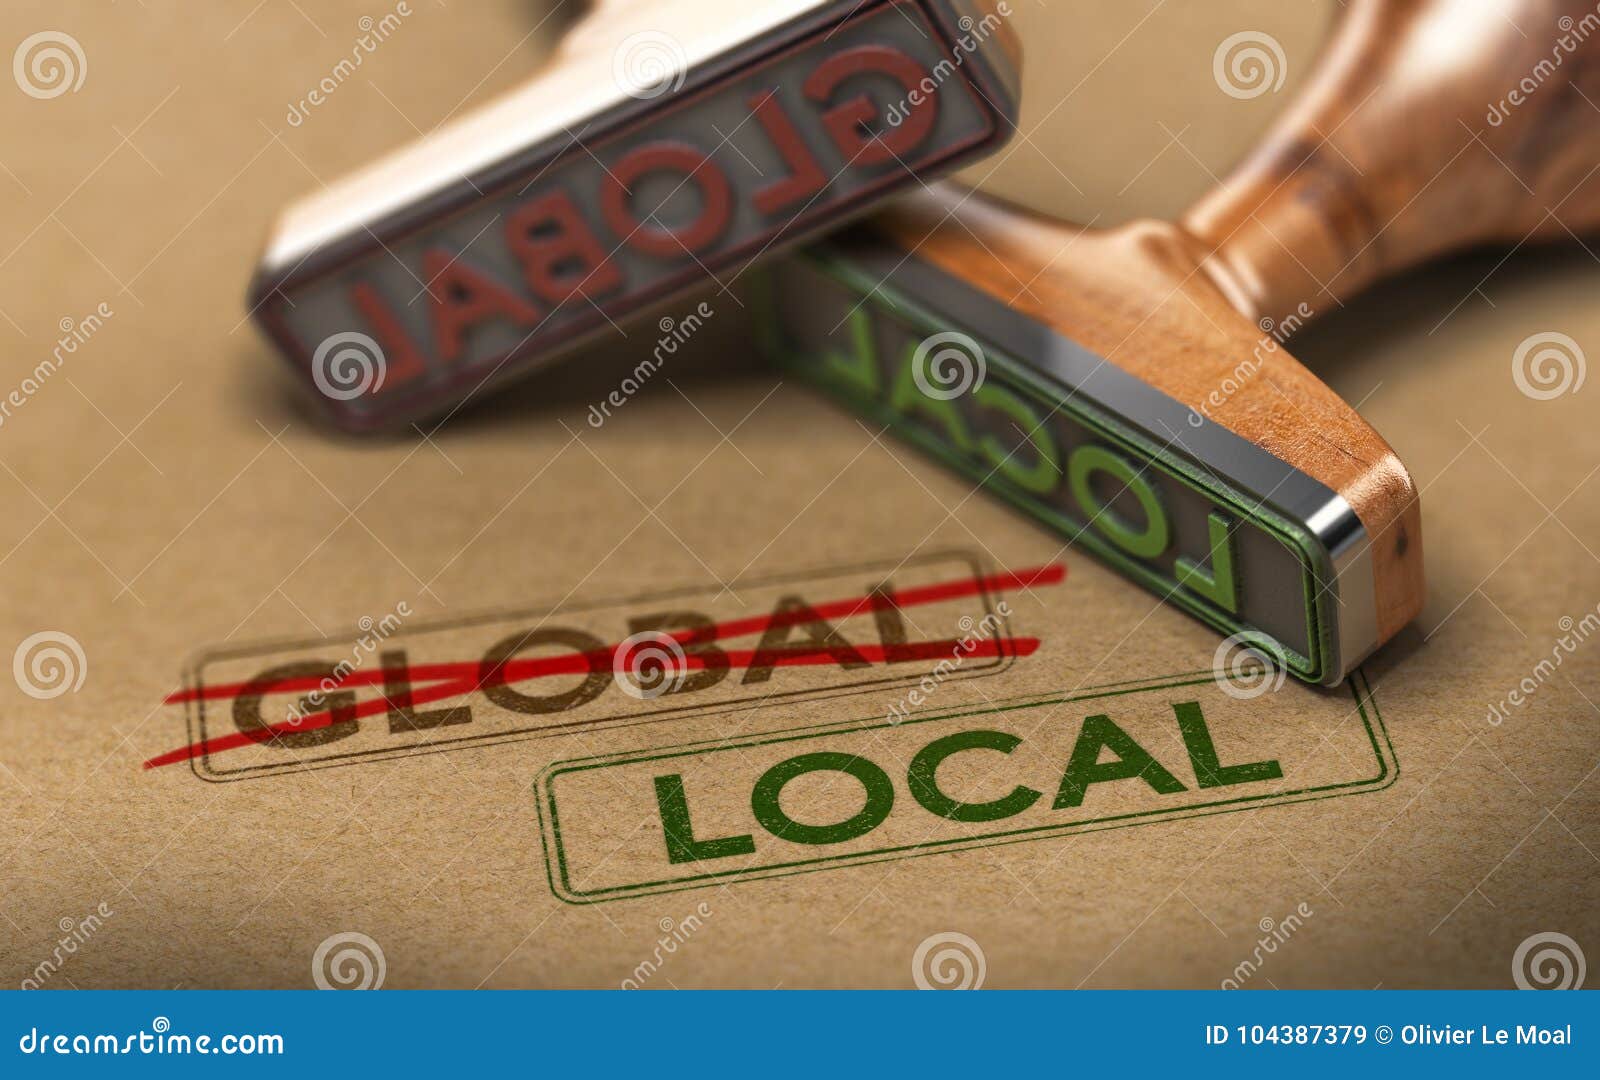 thinking and acting locally, local sourcing